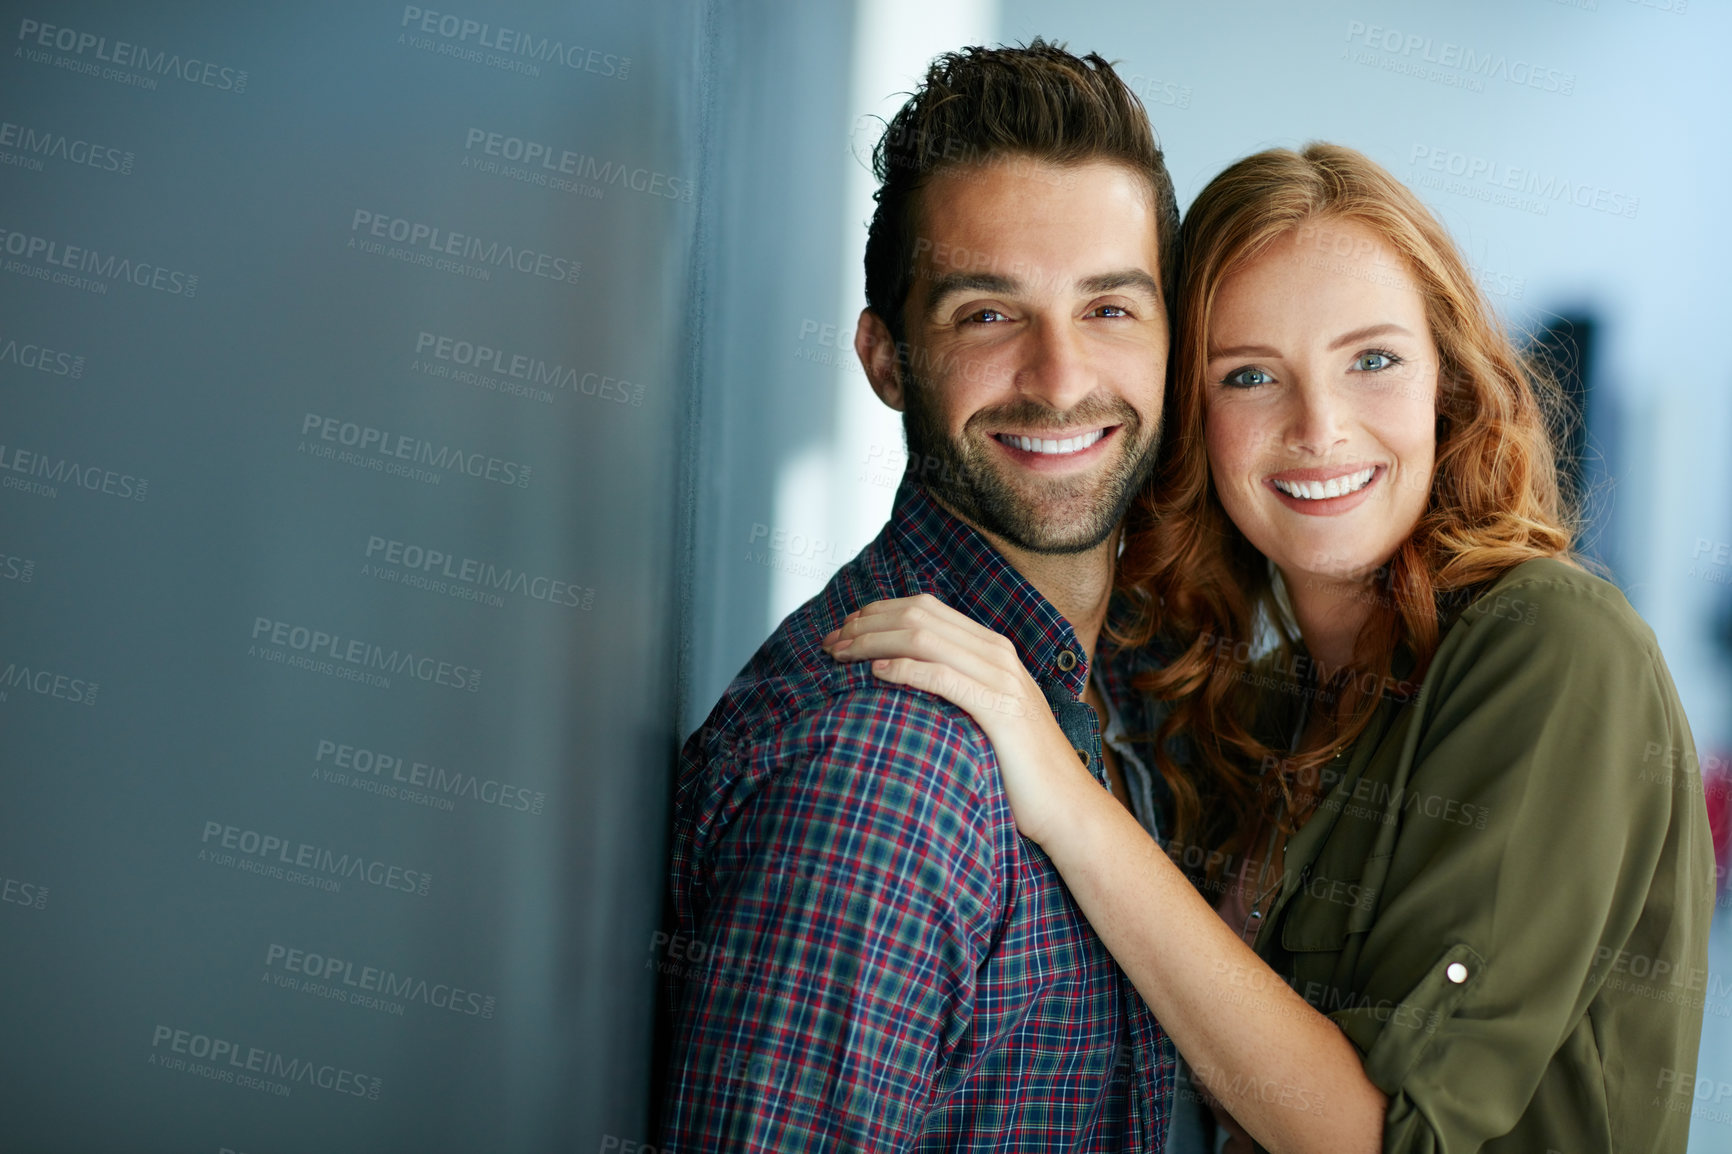 Buy stock photo Portrait of a happy young couple leaning against a blackboard